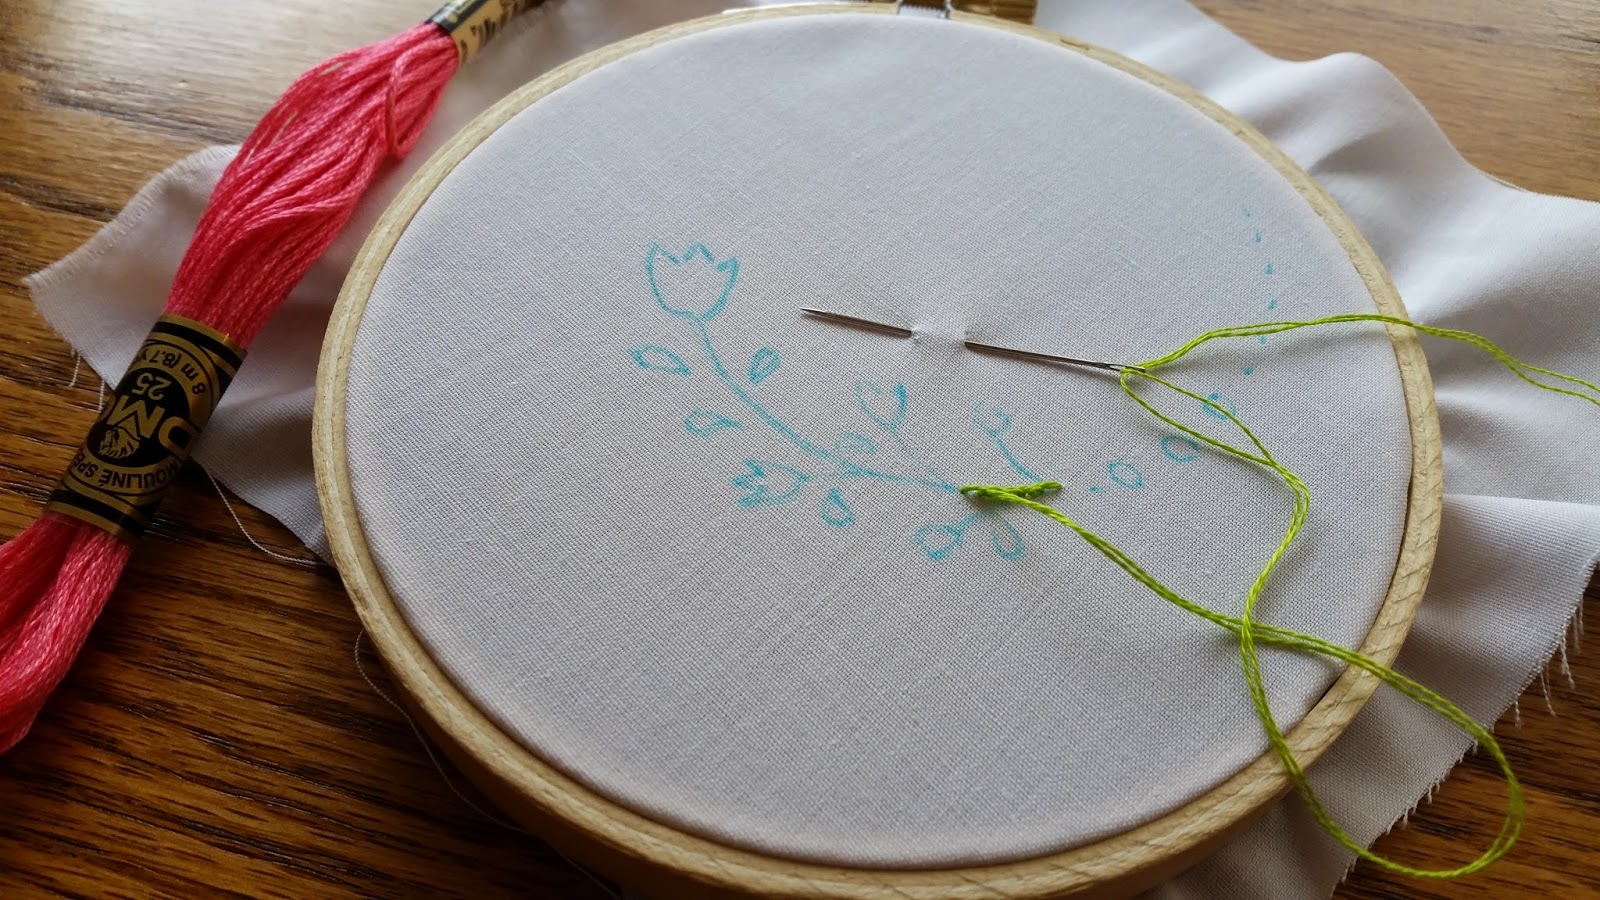 Creations By Michie` Blog: Fabric Markers For Embroidery